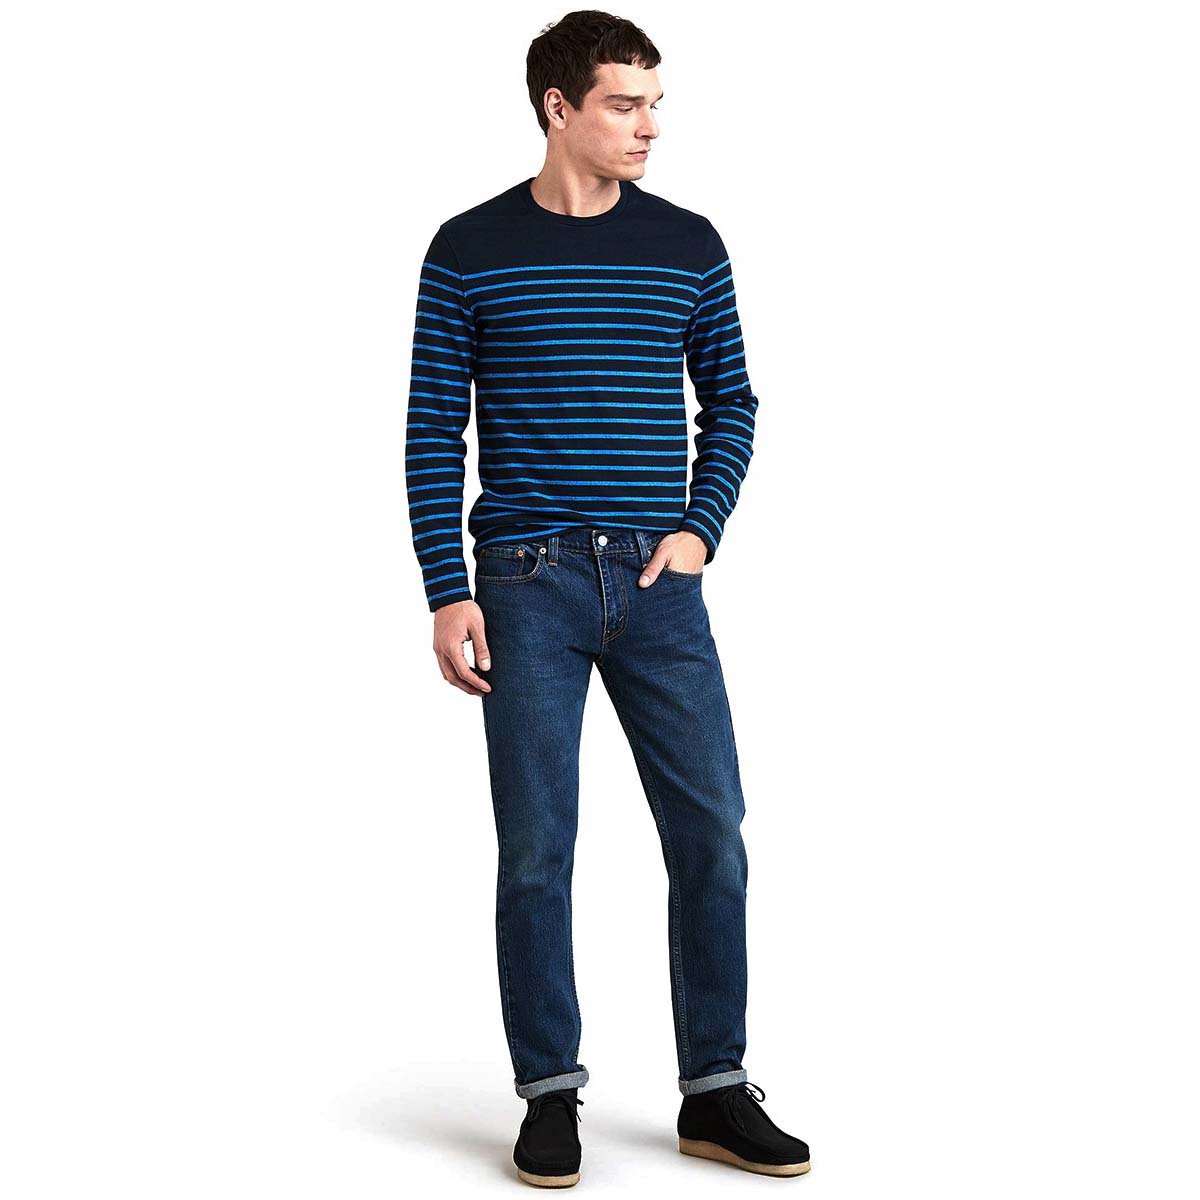 Jeans 511&trade; Slim Fit Color Azul.